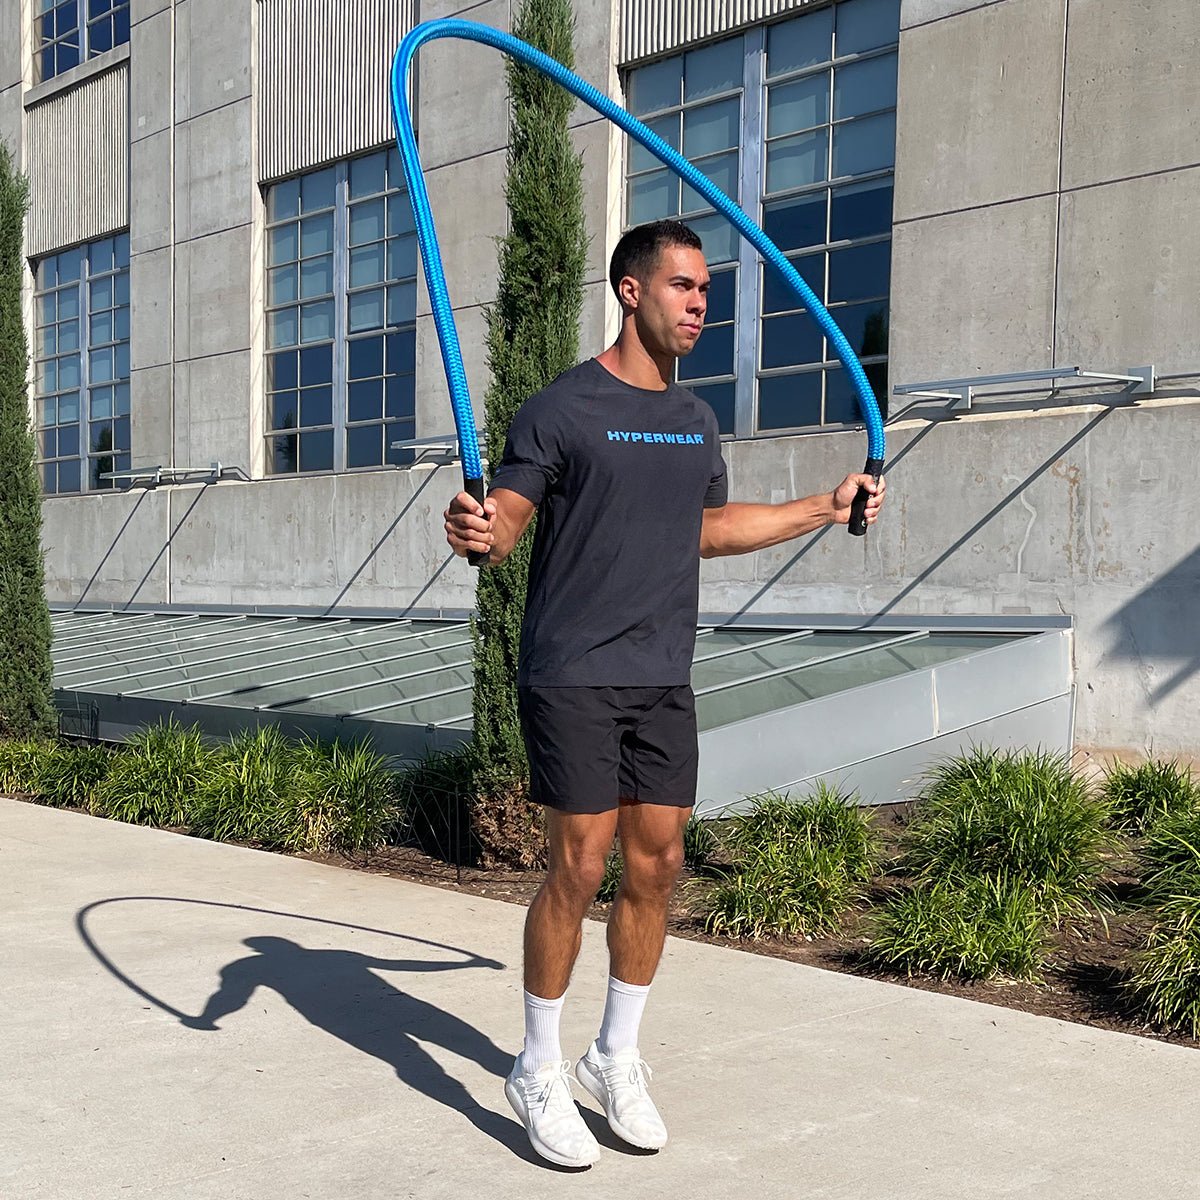 Weighted Jump Rope Benefits Why You